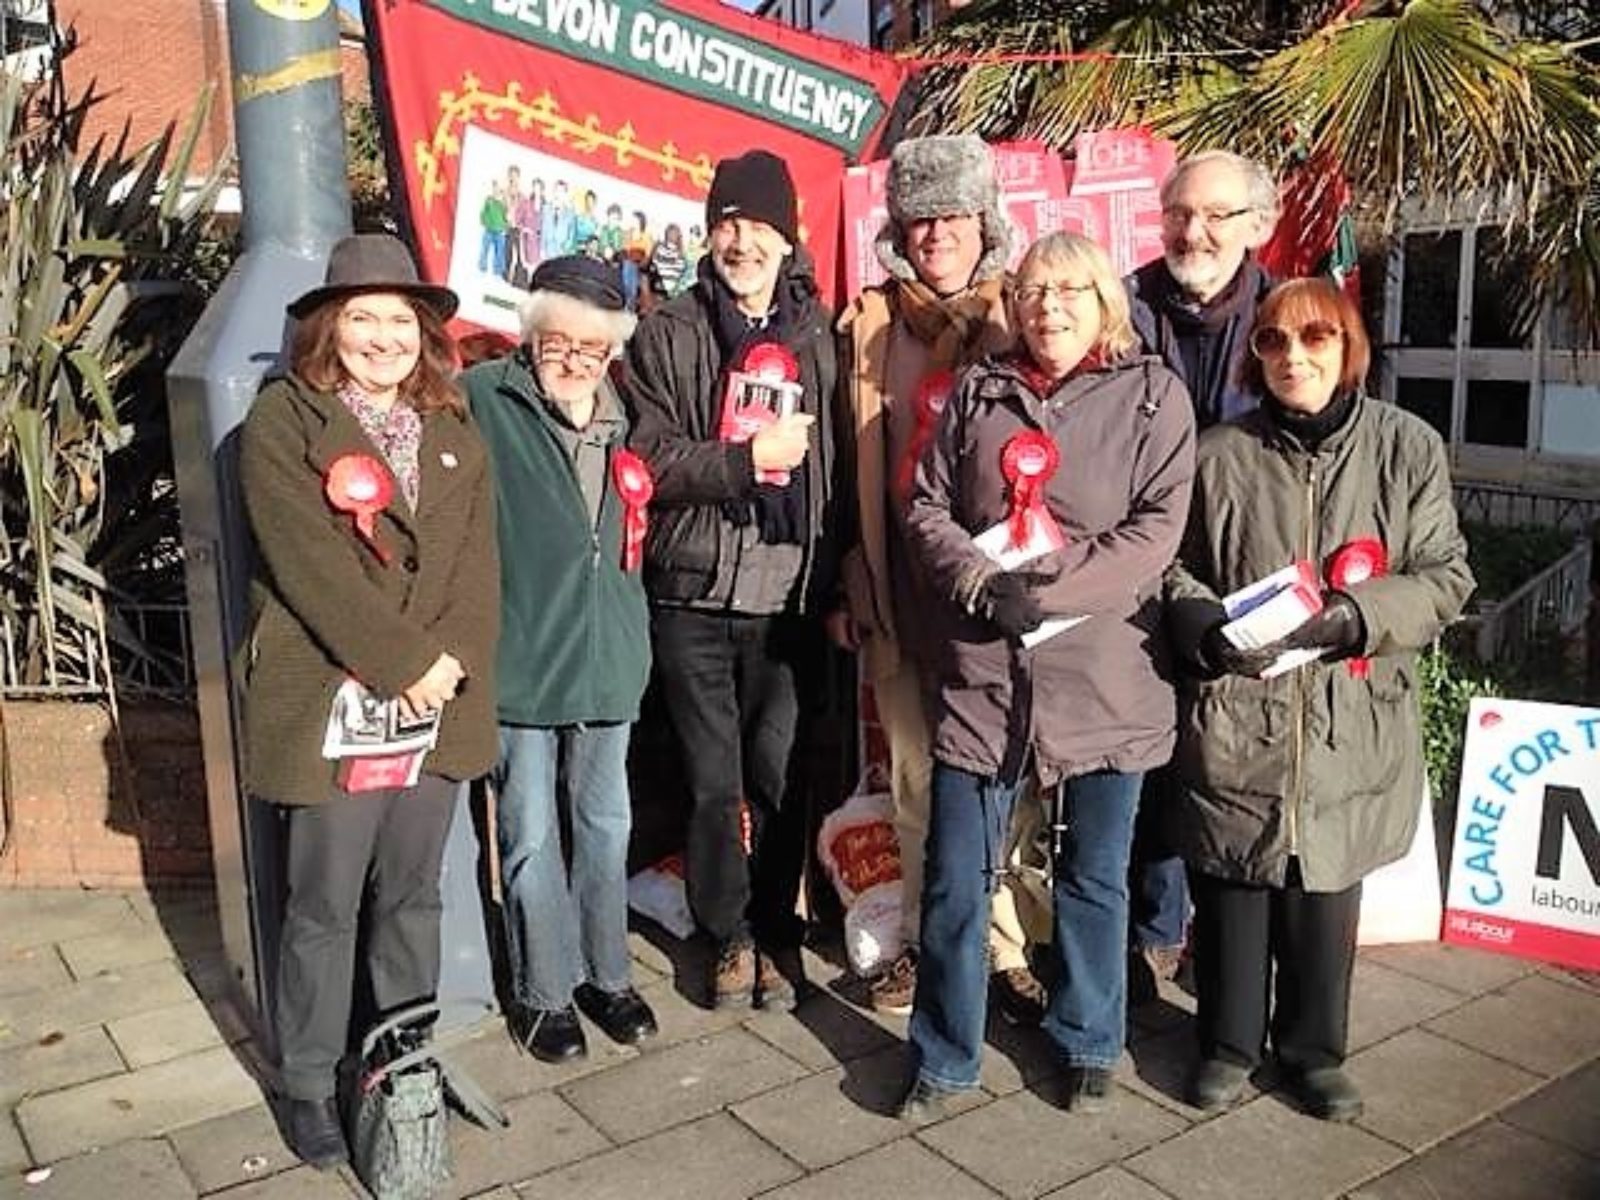 East Devon CLP Members out Campaigning